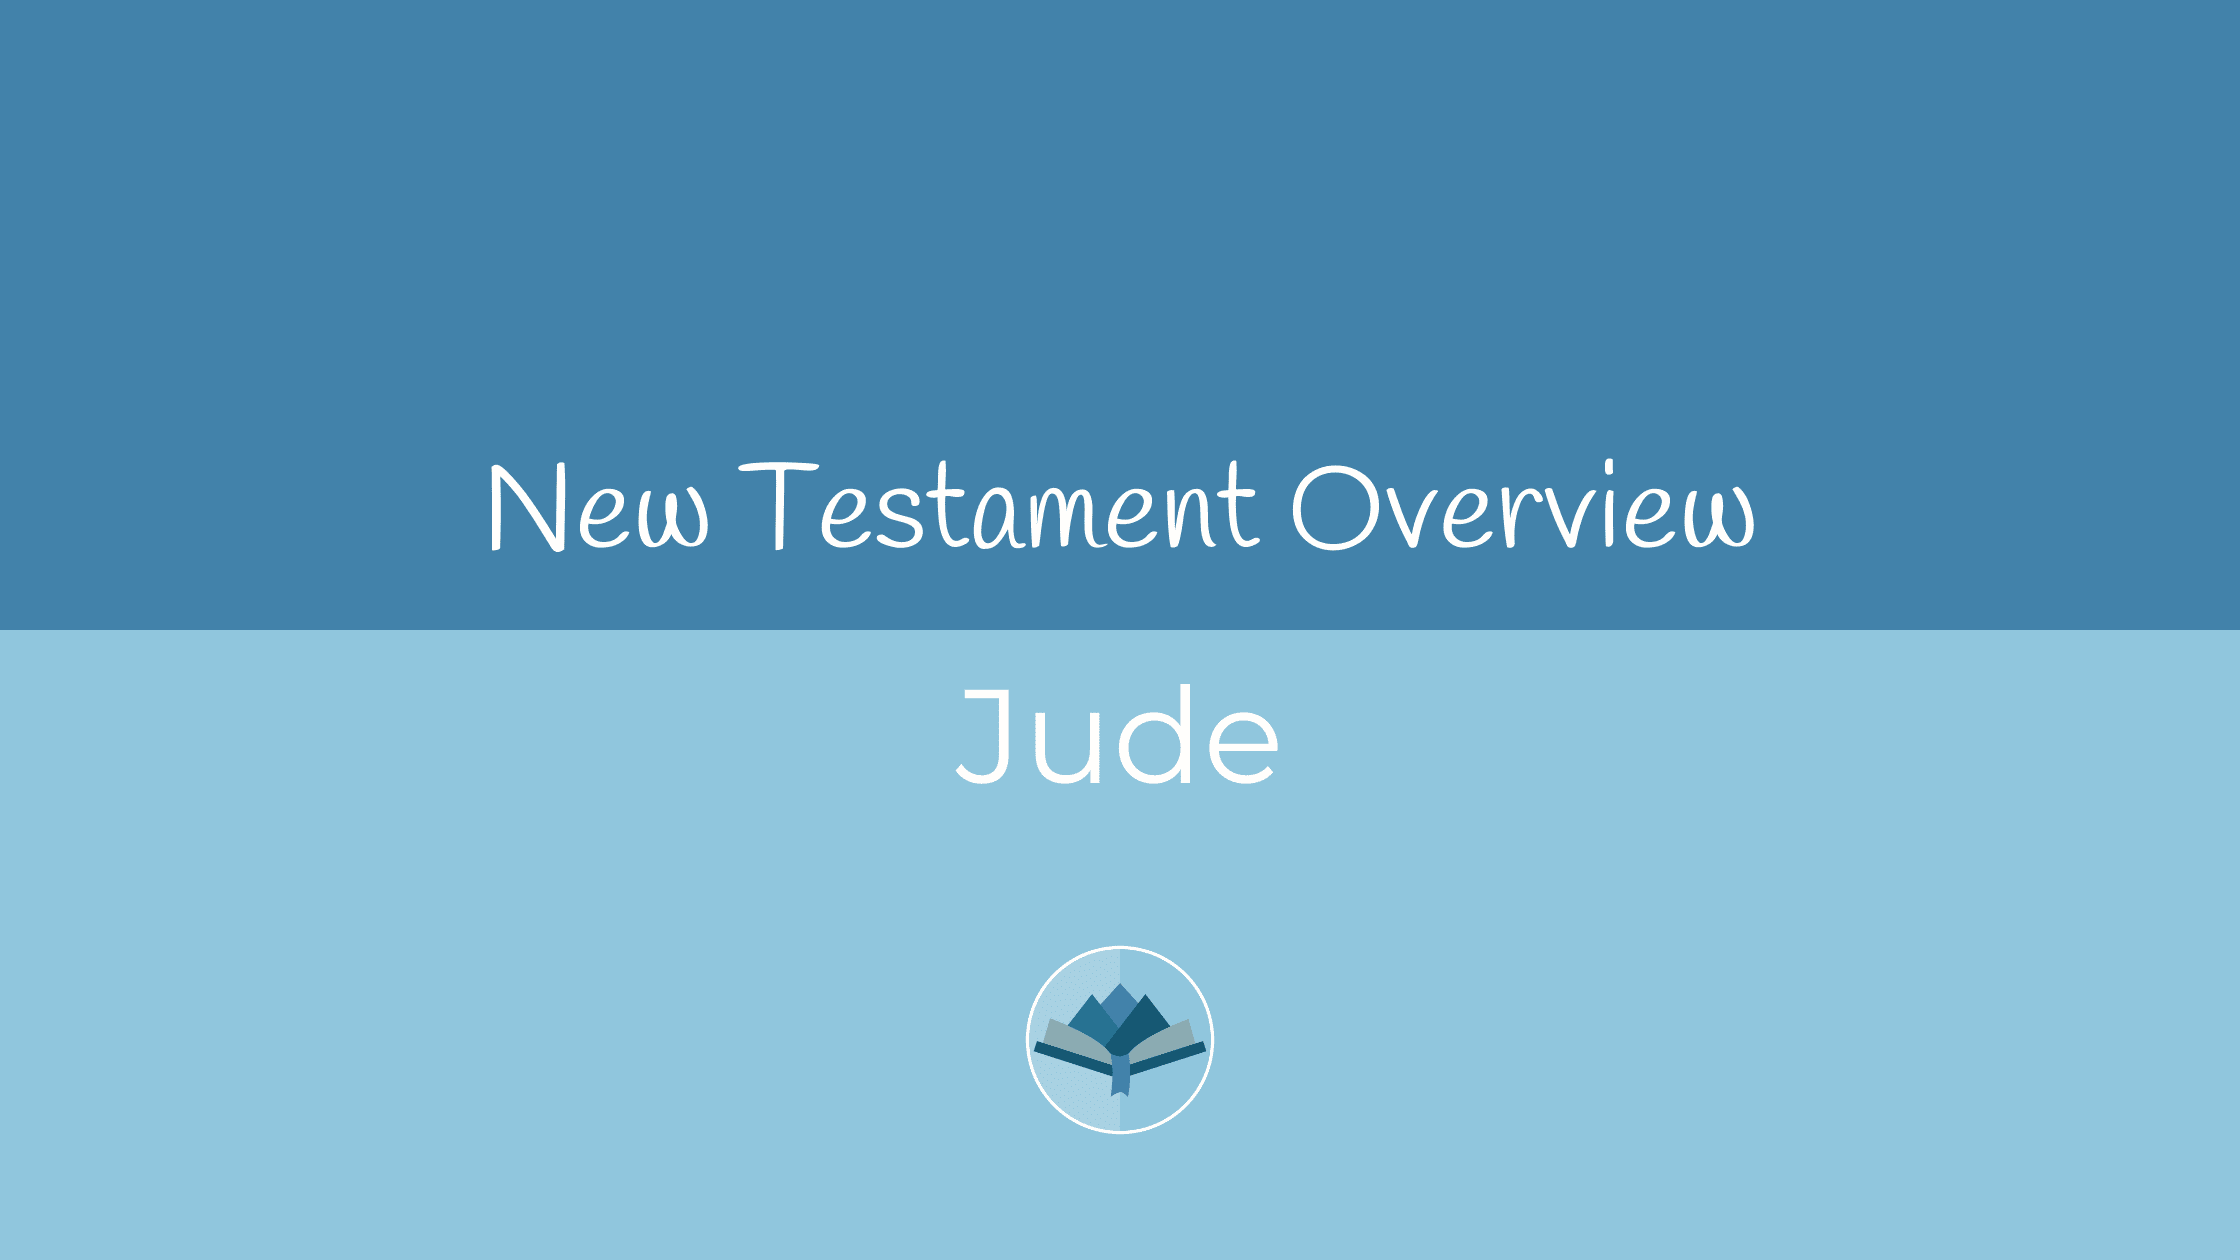 Jude Overview